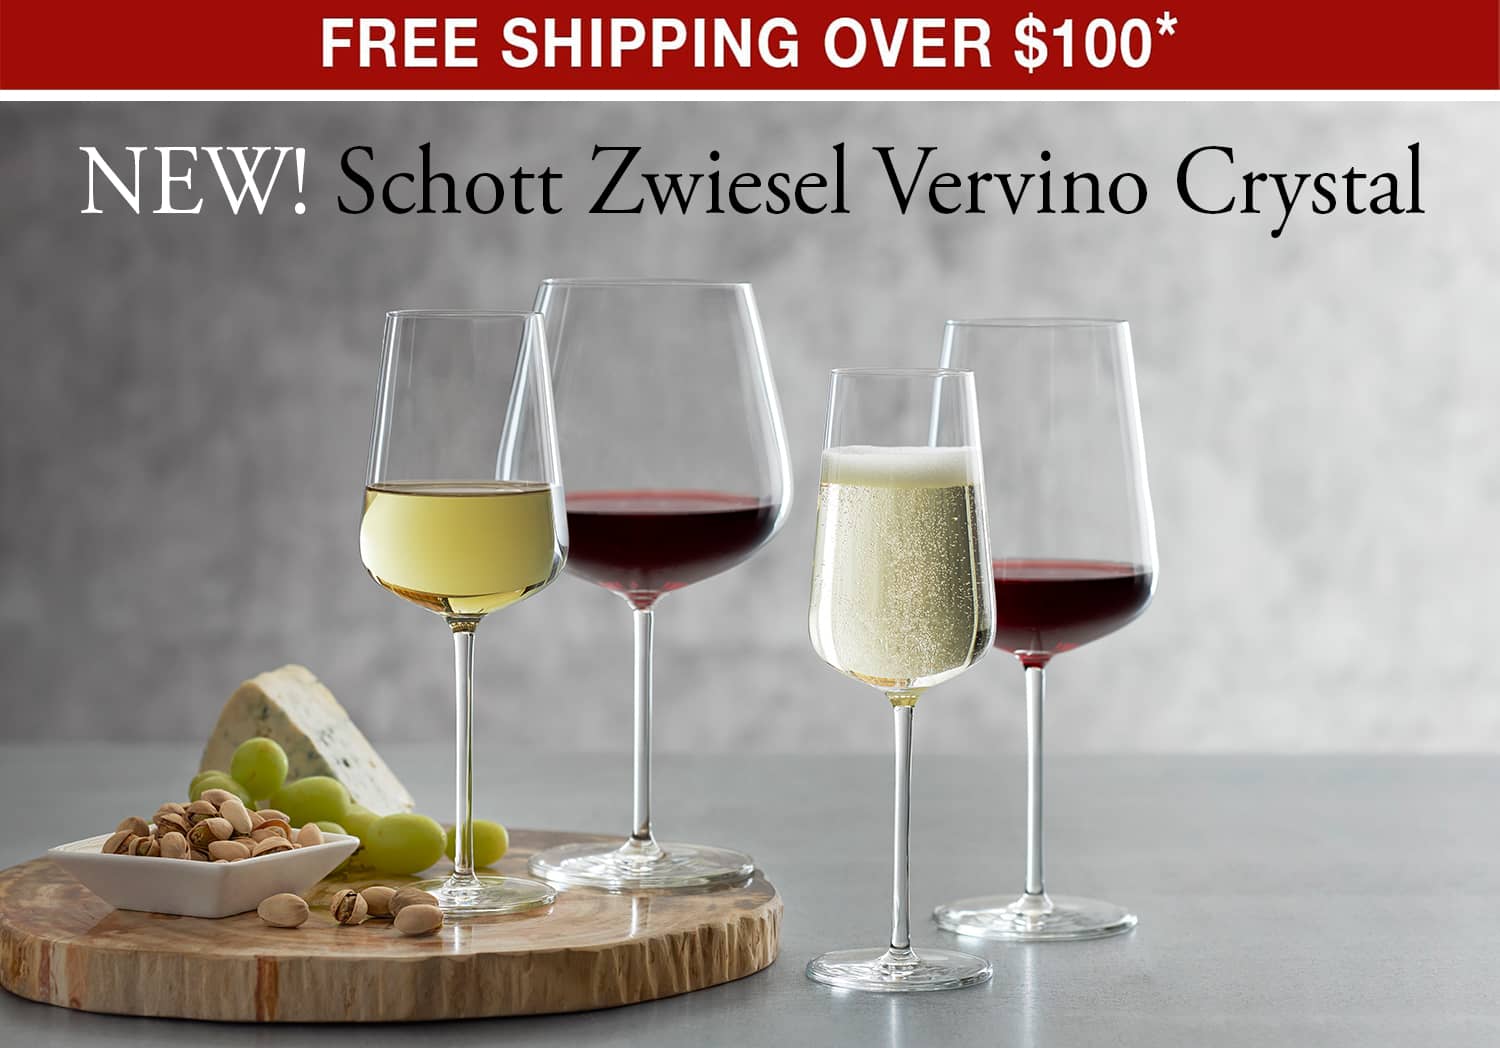 NEW! Schott Zwiesel Vervino Crystal + Free Shipping Over $100*